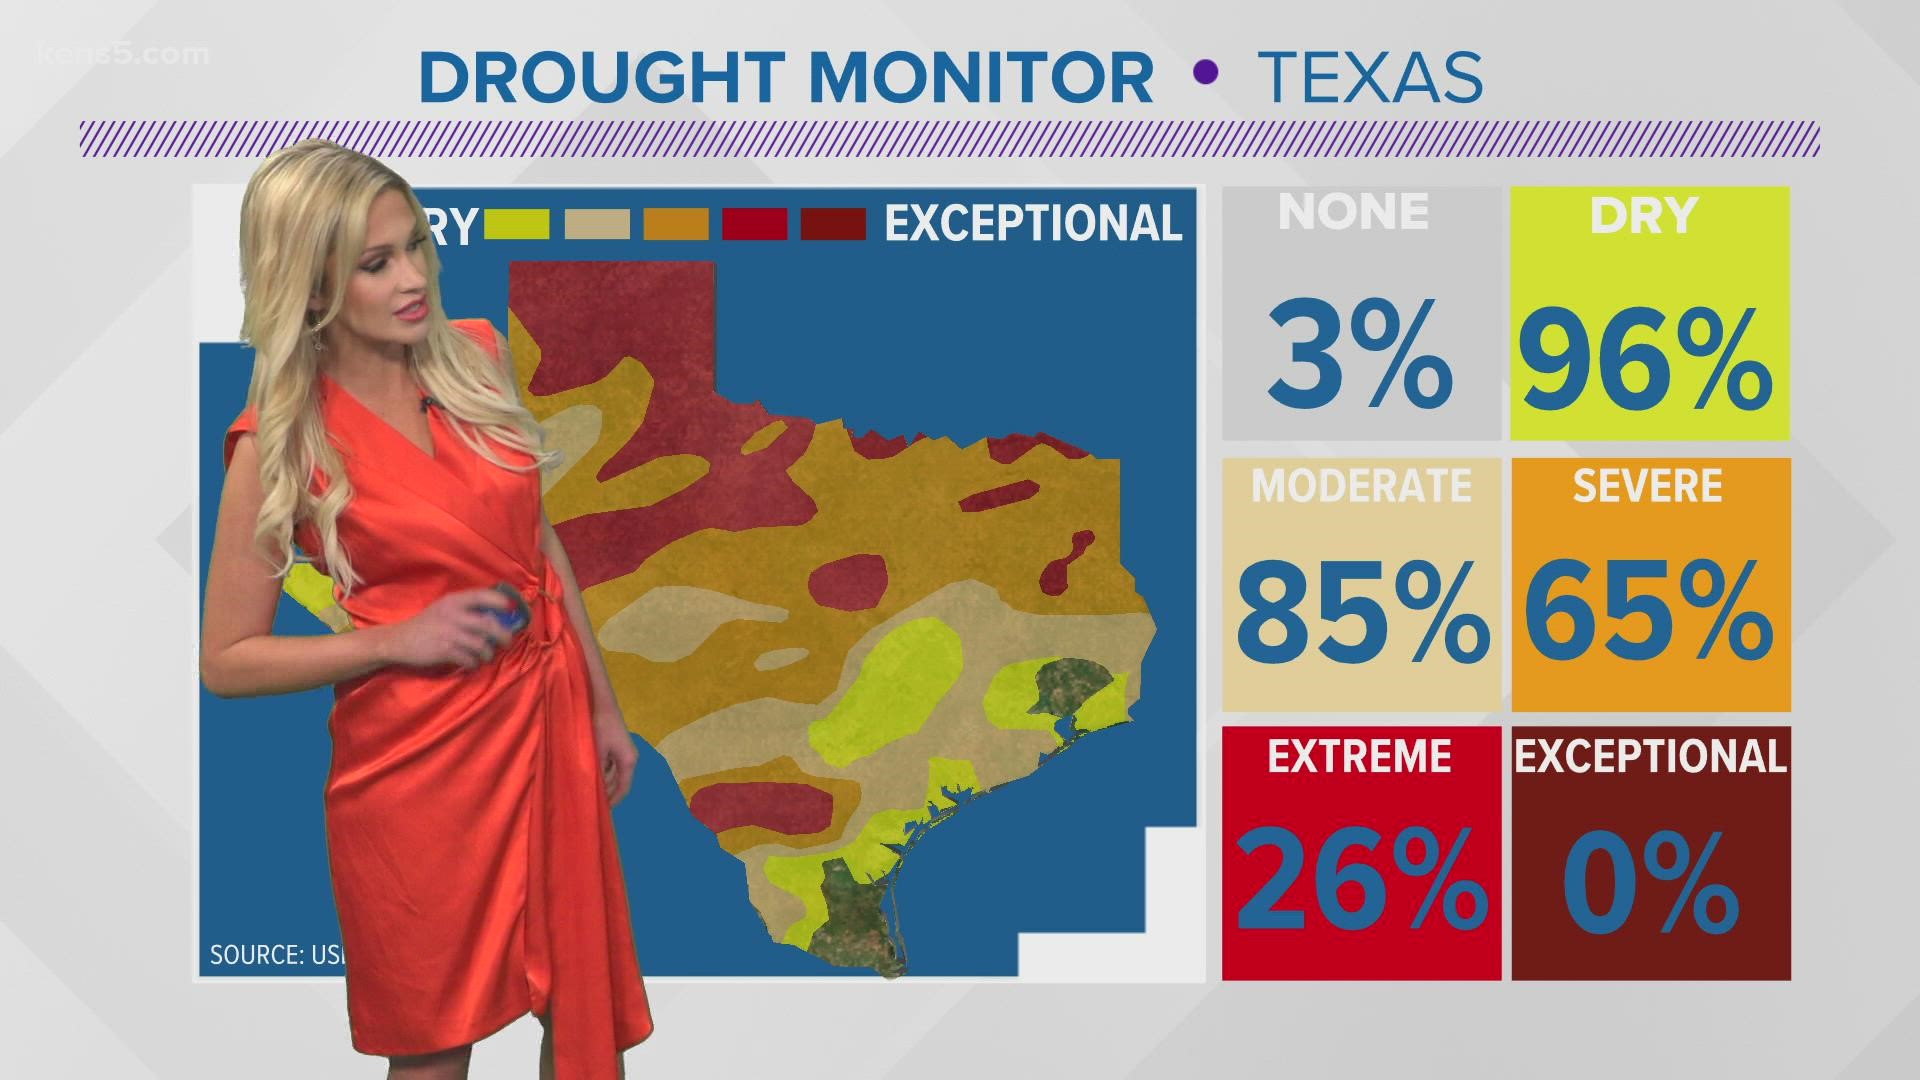 There are three counties to the south of San Antonio that are in extreme drought conditions.